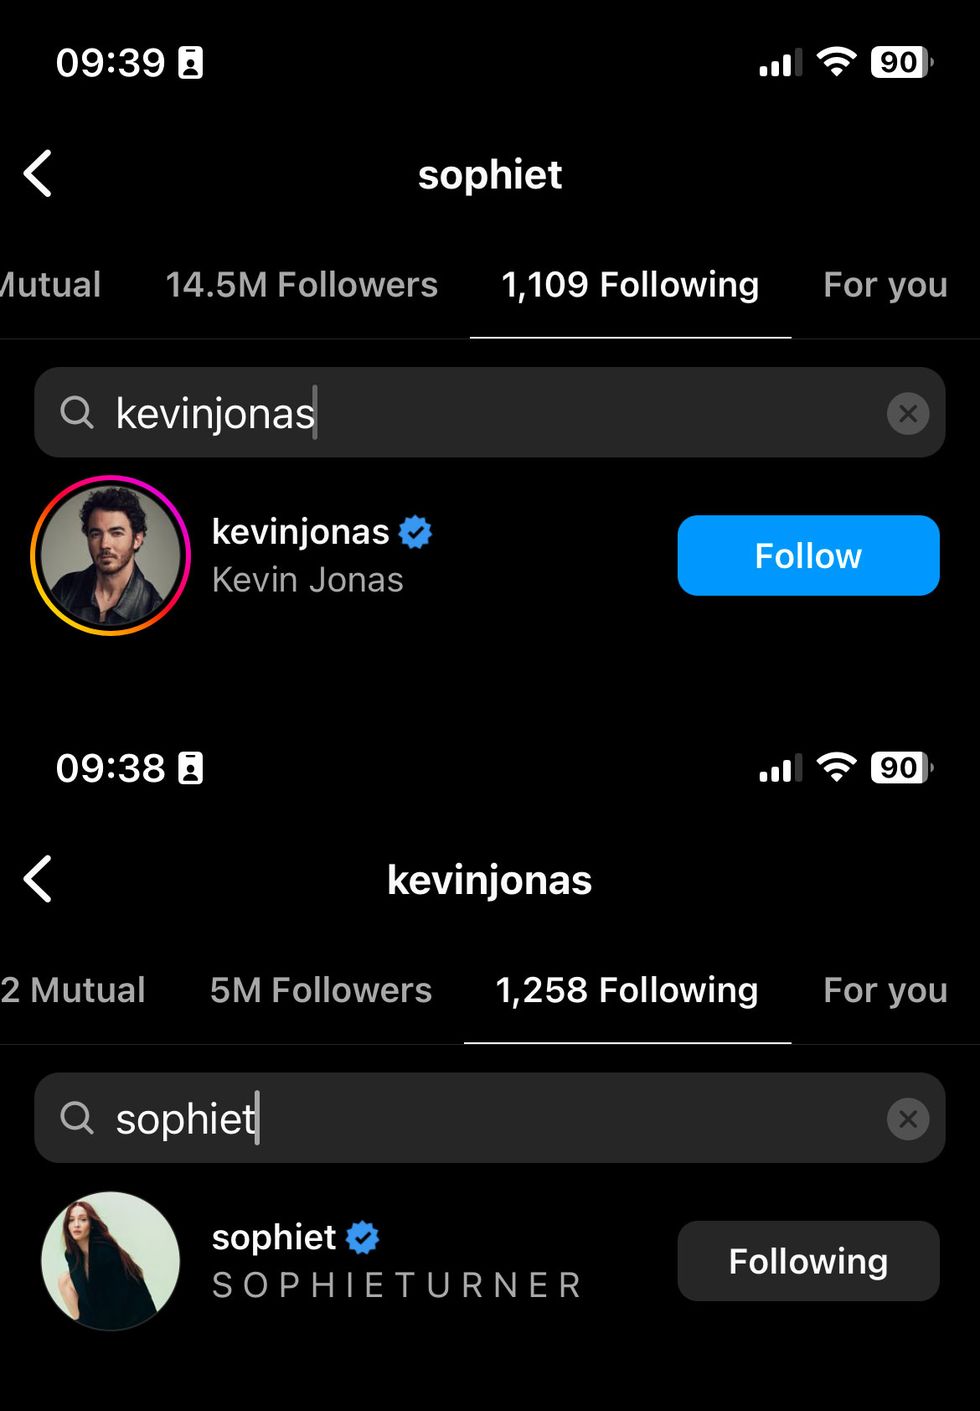 kevin jonas and sophie turner still following each other as of october 13 at 930 am